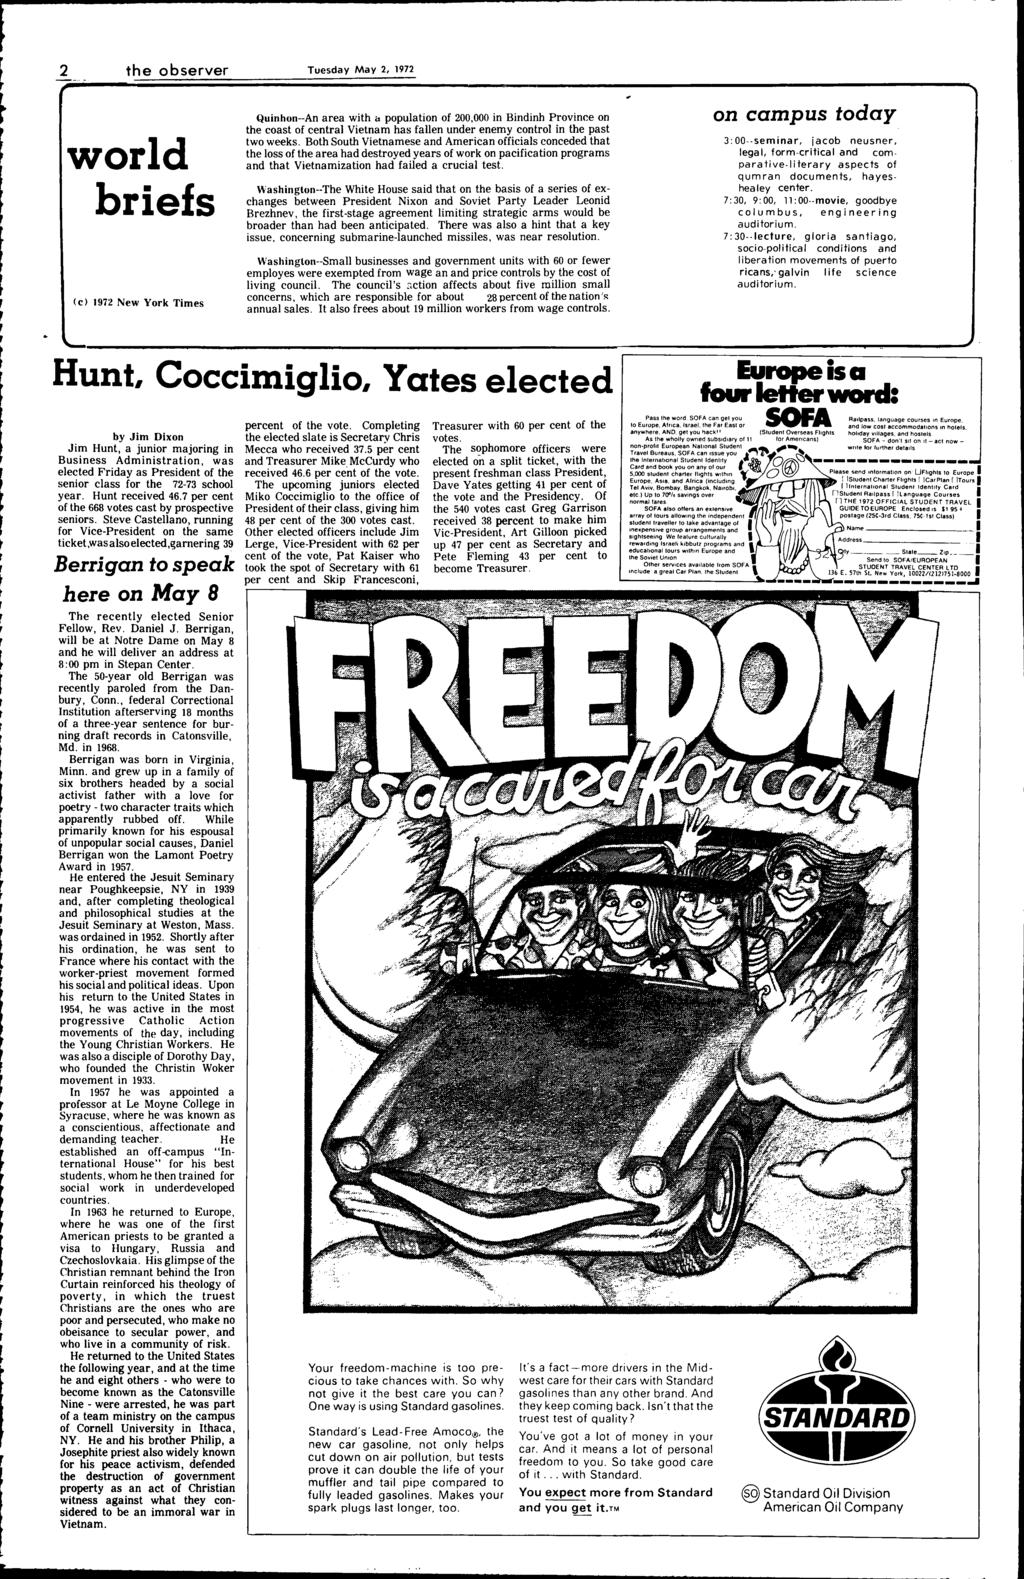 2 the observer world briefs (c) 1972 New York Times Tuesday May 2, 1972 Quinhon--An area with a population of 200,000 in Bindinh Province on the coast of central Vietnam has fallen under enemy